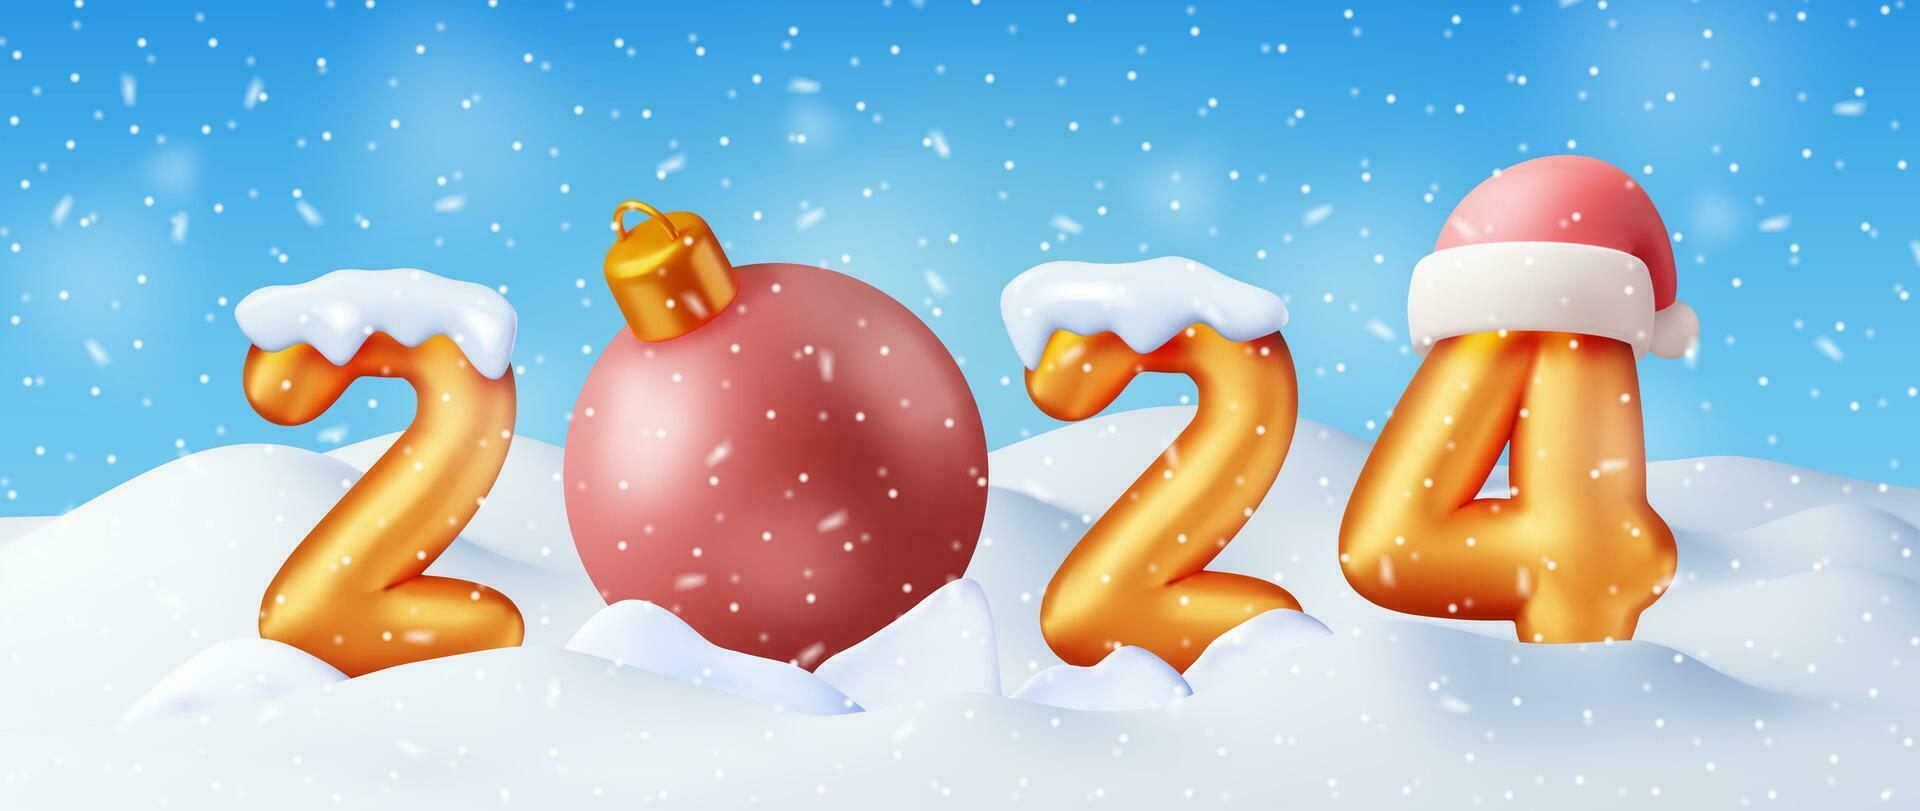 3d Gold Balloon 2024 New Year Symbol in Snow Landscape. Render Golden 2024 Number Holiday Party Decoration. Metallic Ballon Shiny Font. New Year and Xmas Celebration. Realistic Vector Illustration